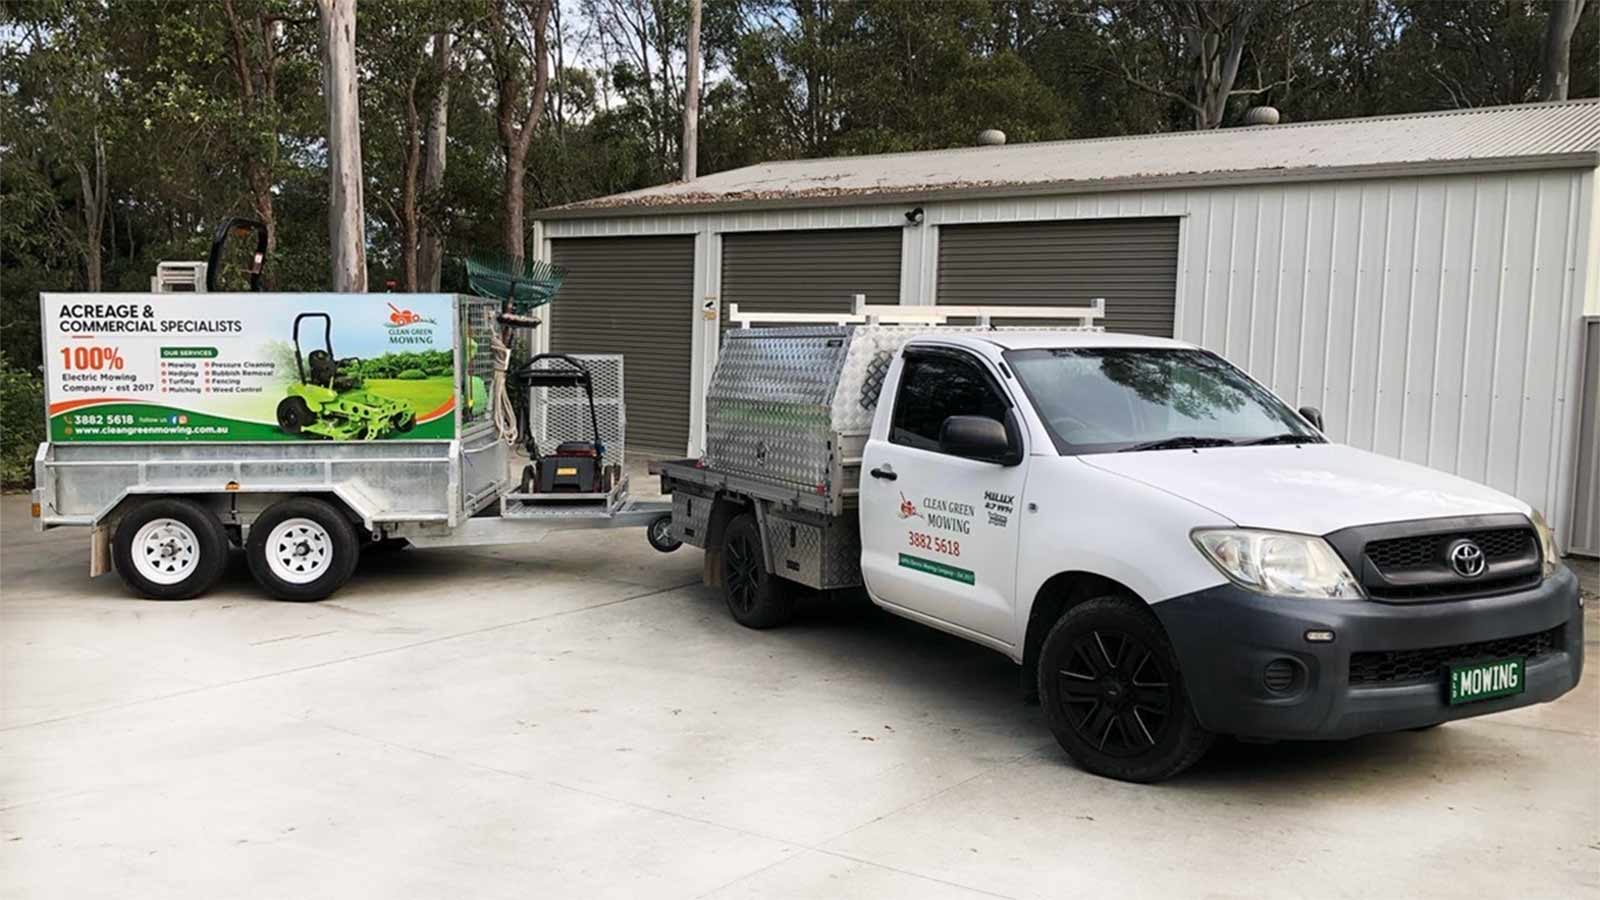 Clean Green Mowing - Commercial and Acreage Lawn Specialists Brisbane